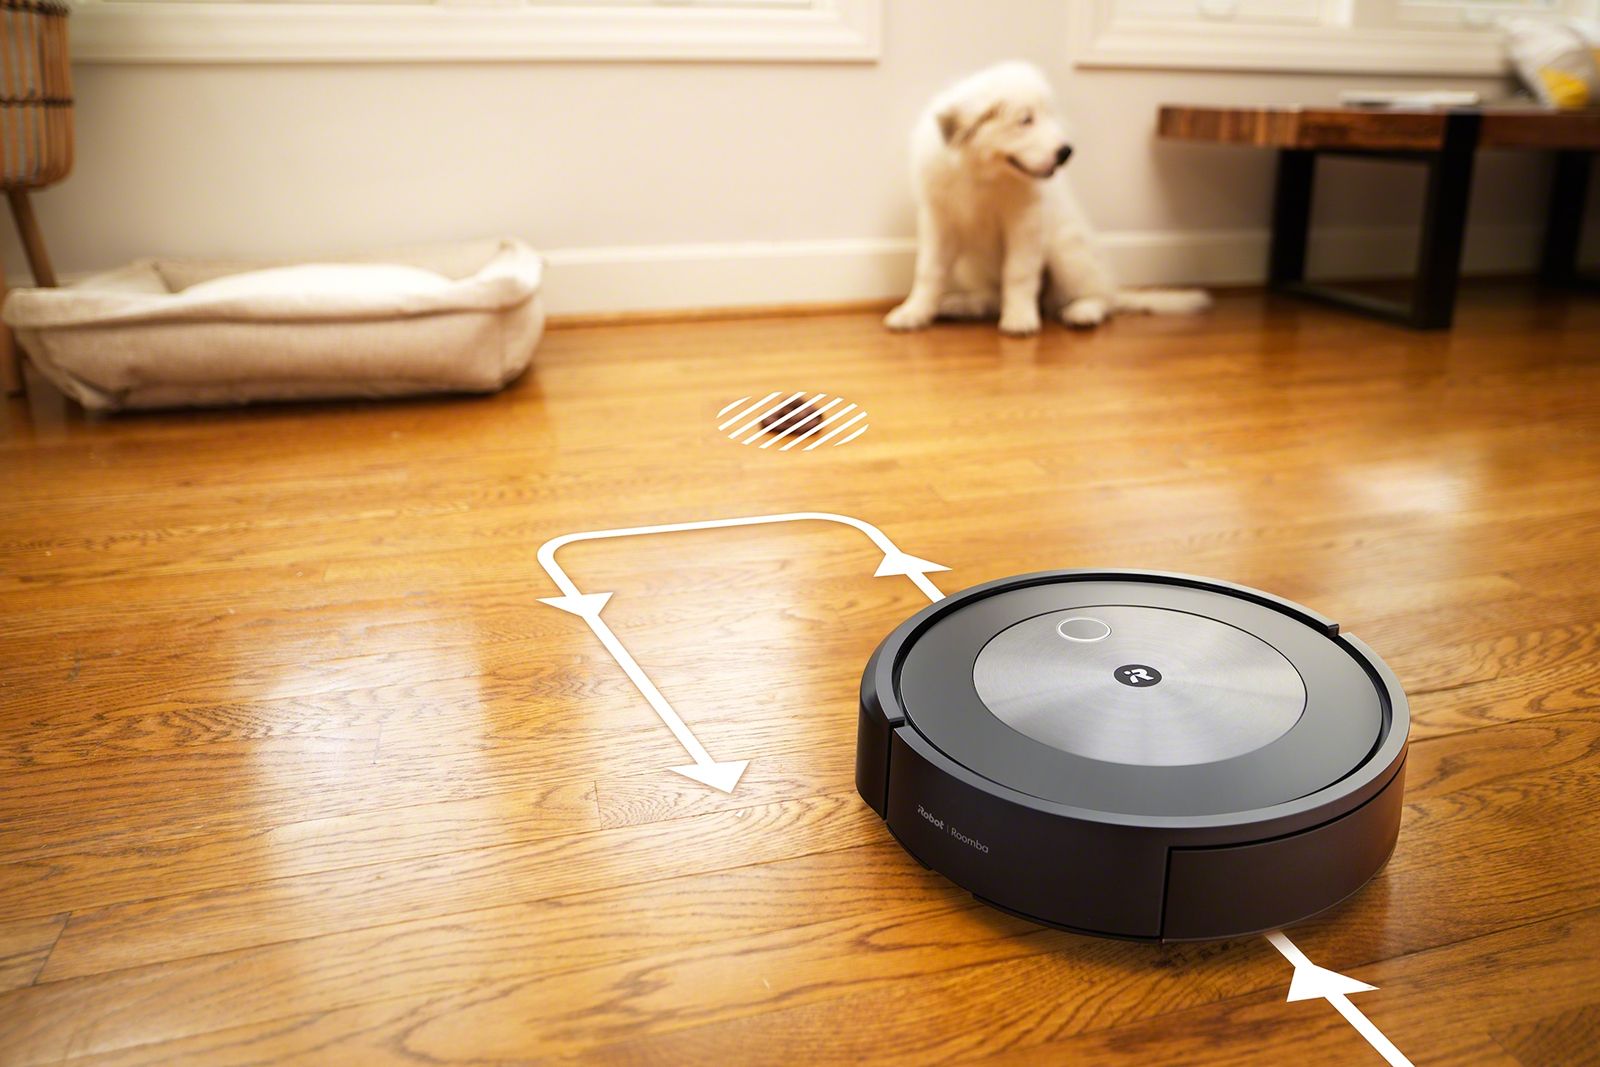 iRobot J7+ robot vacuum identifies obstacles, including cables and pet waste photo 2